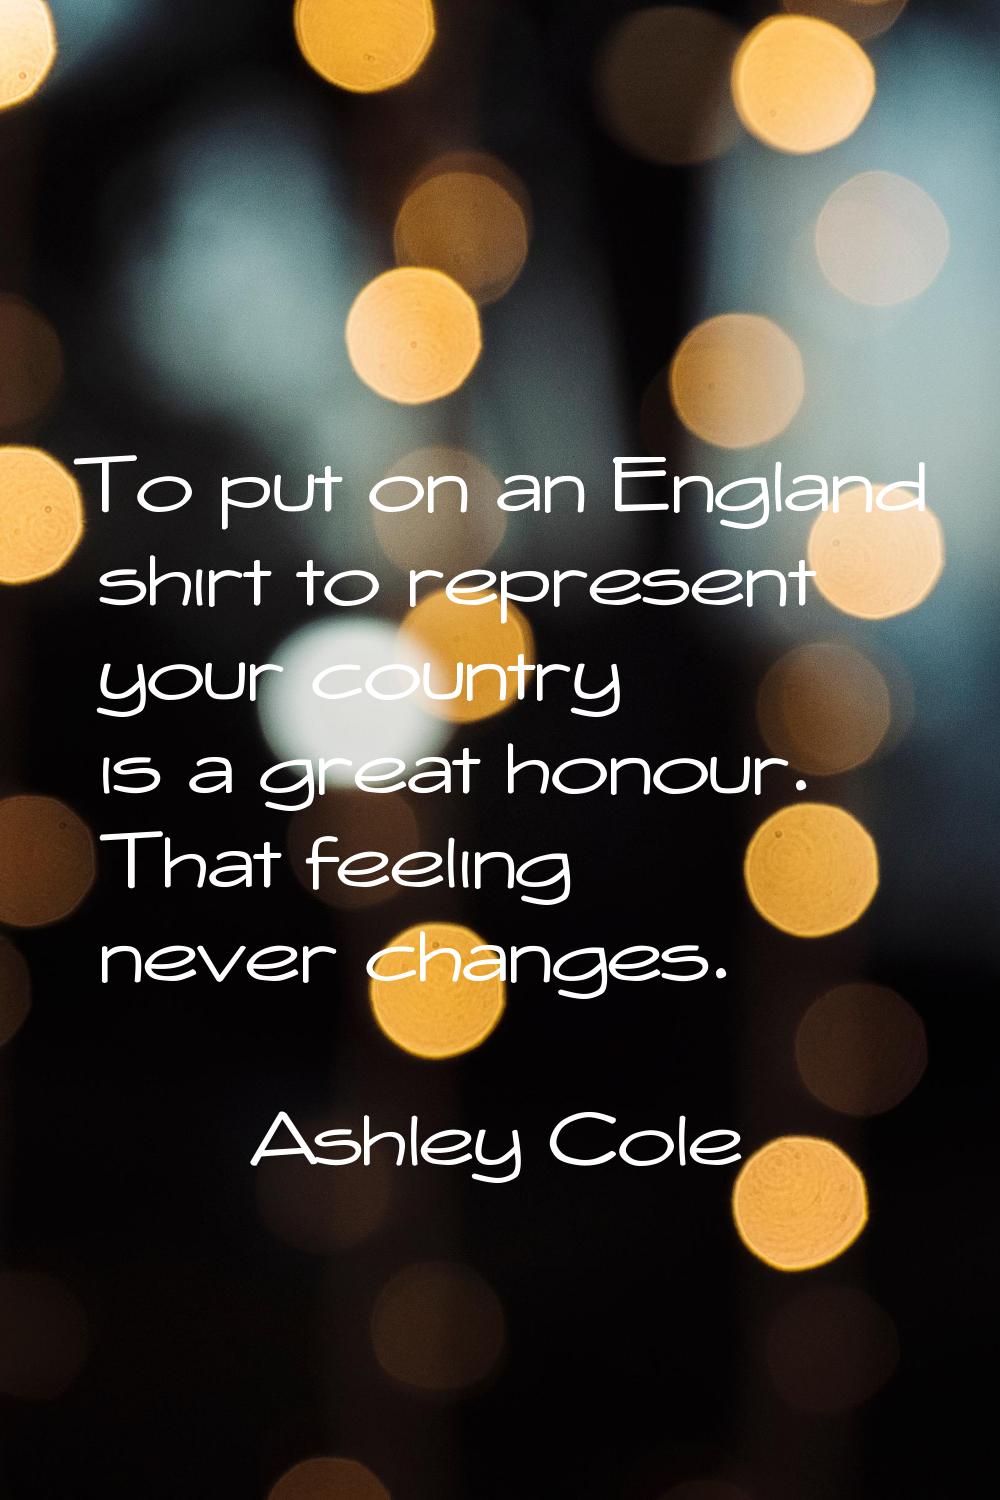 To put on an England shirt to represent your country is a great honour. That feeling never changes.